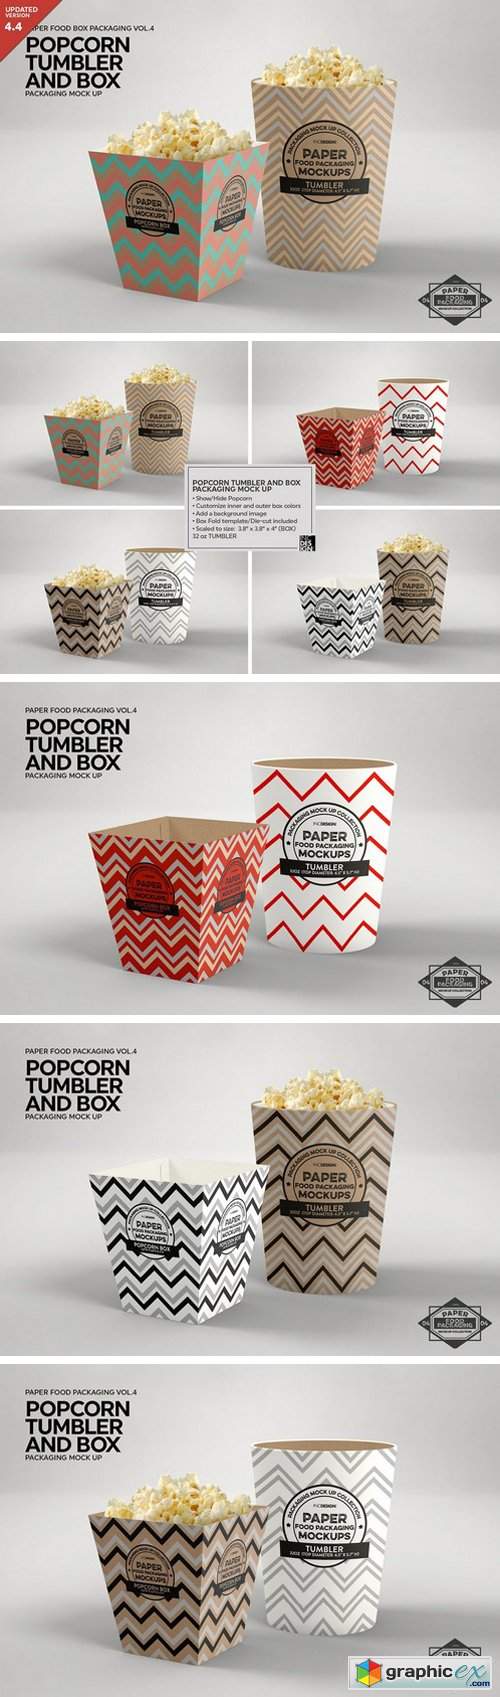 Popcorn Containers Packaging Mockup